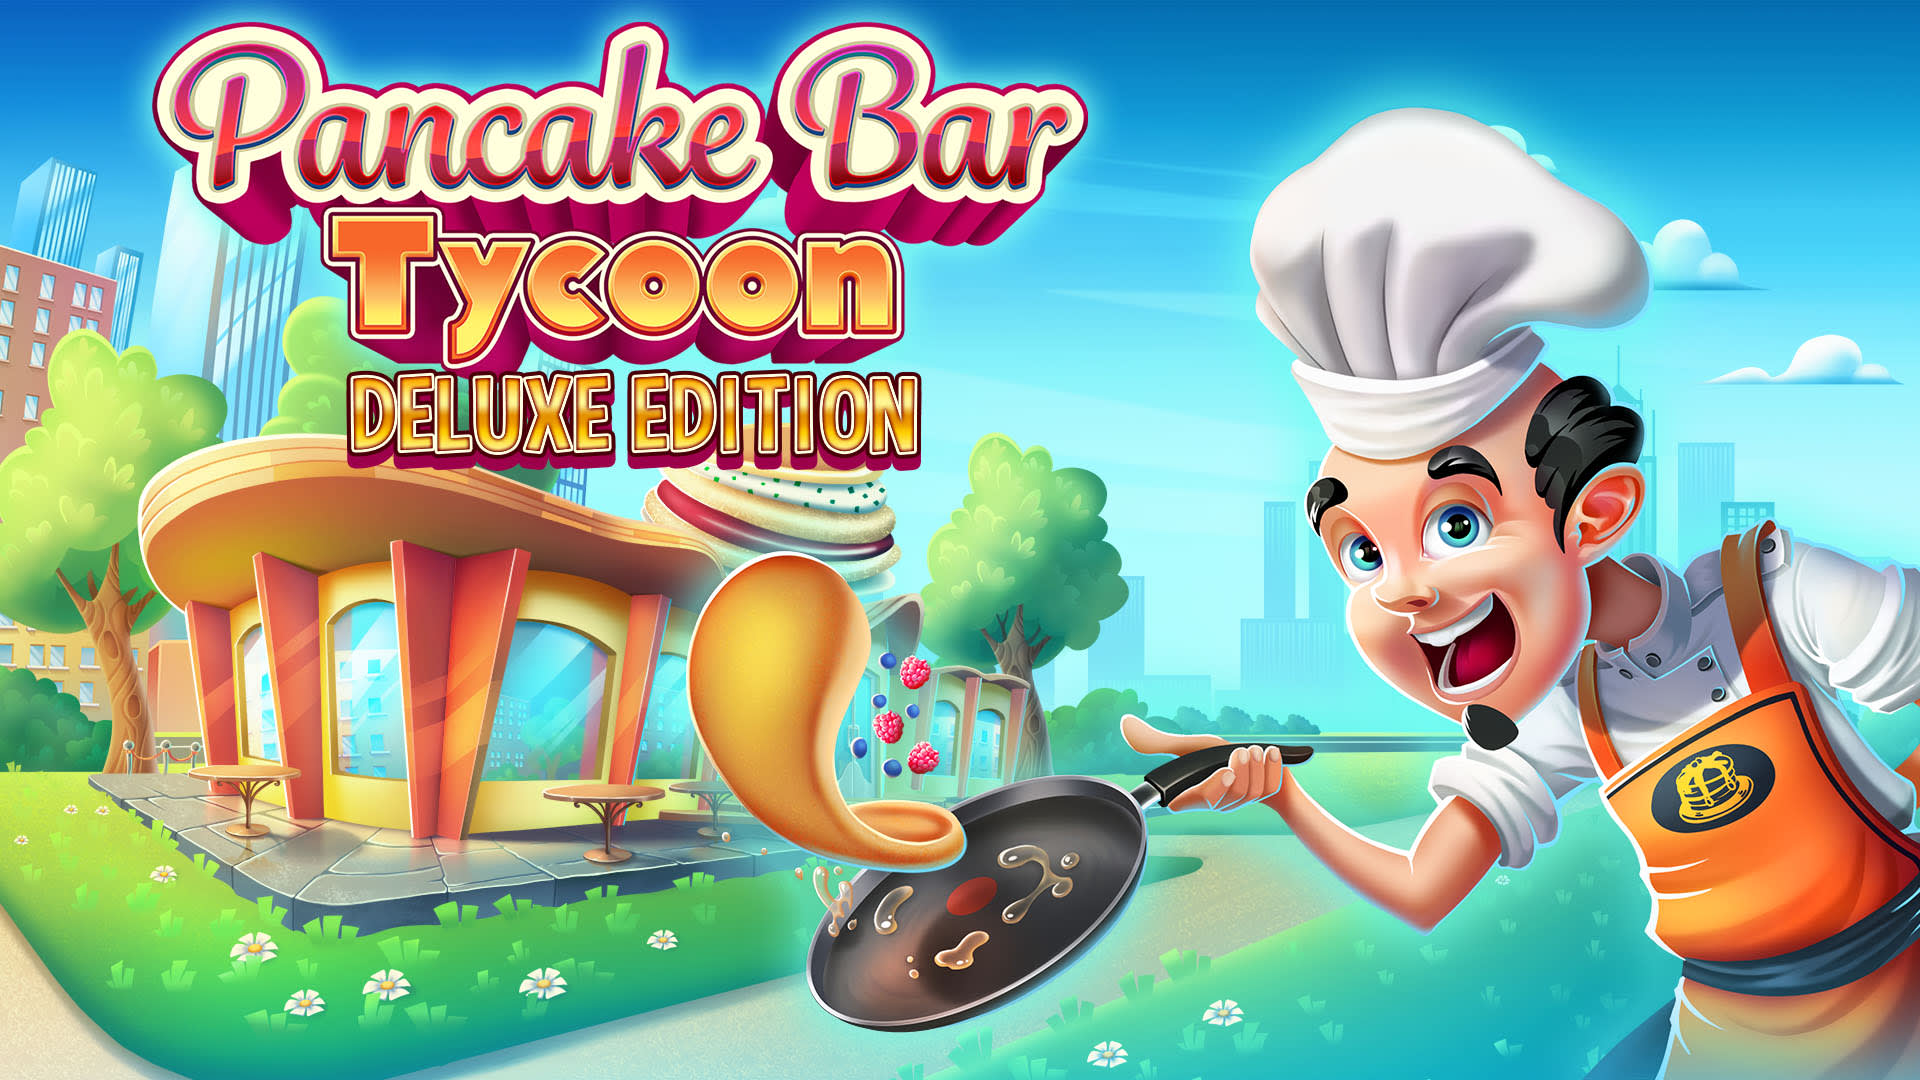 Pancake Bar Tycoon Deluxe Edition